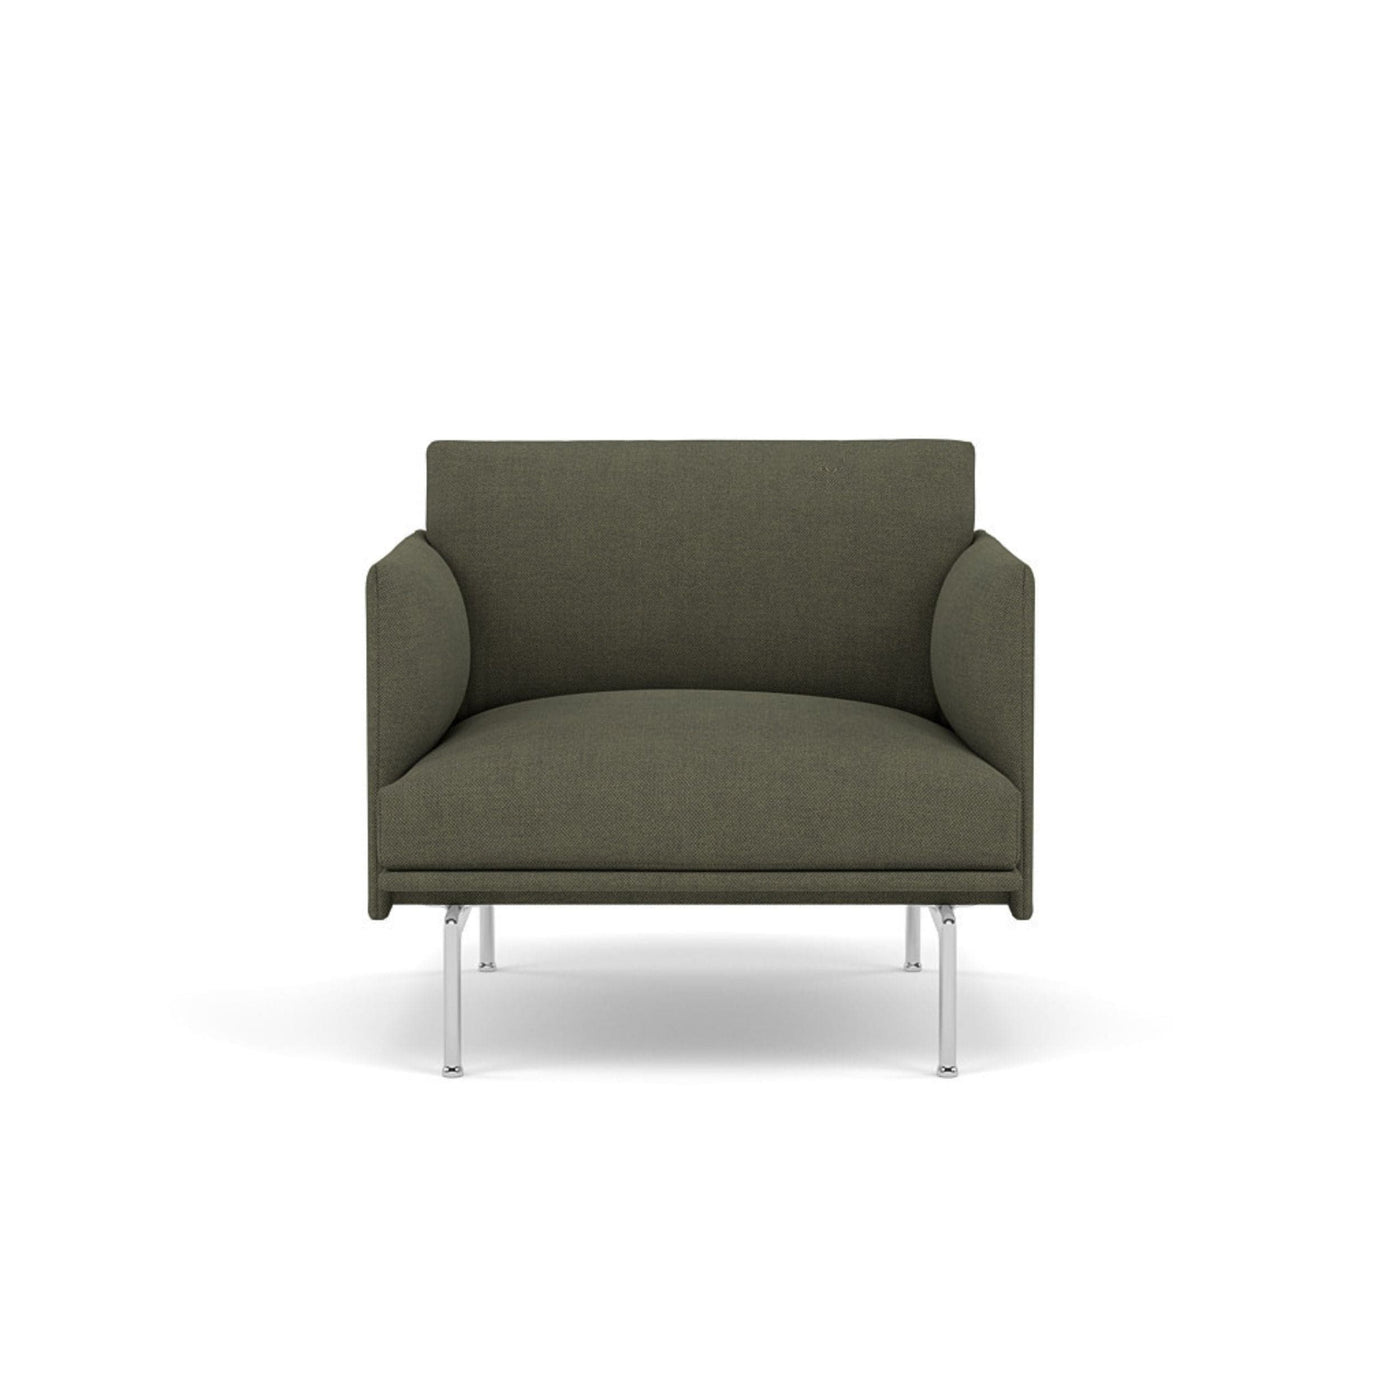 muuto outline studio chair in fiord 961 and polished aluminium legs. Available at someday designs. #colour_fiord-961